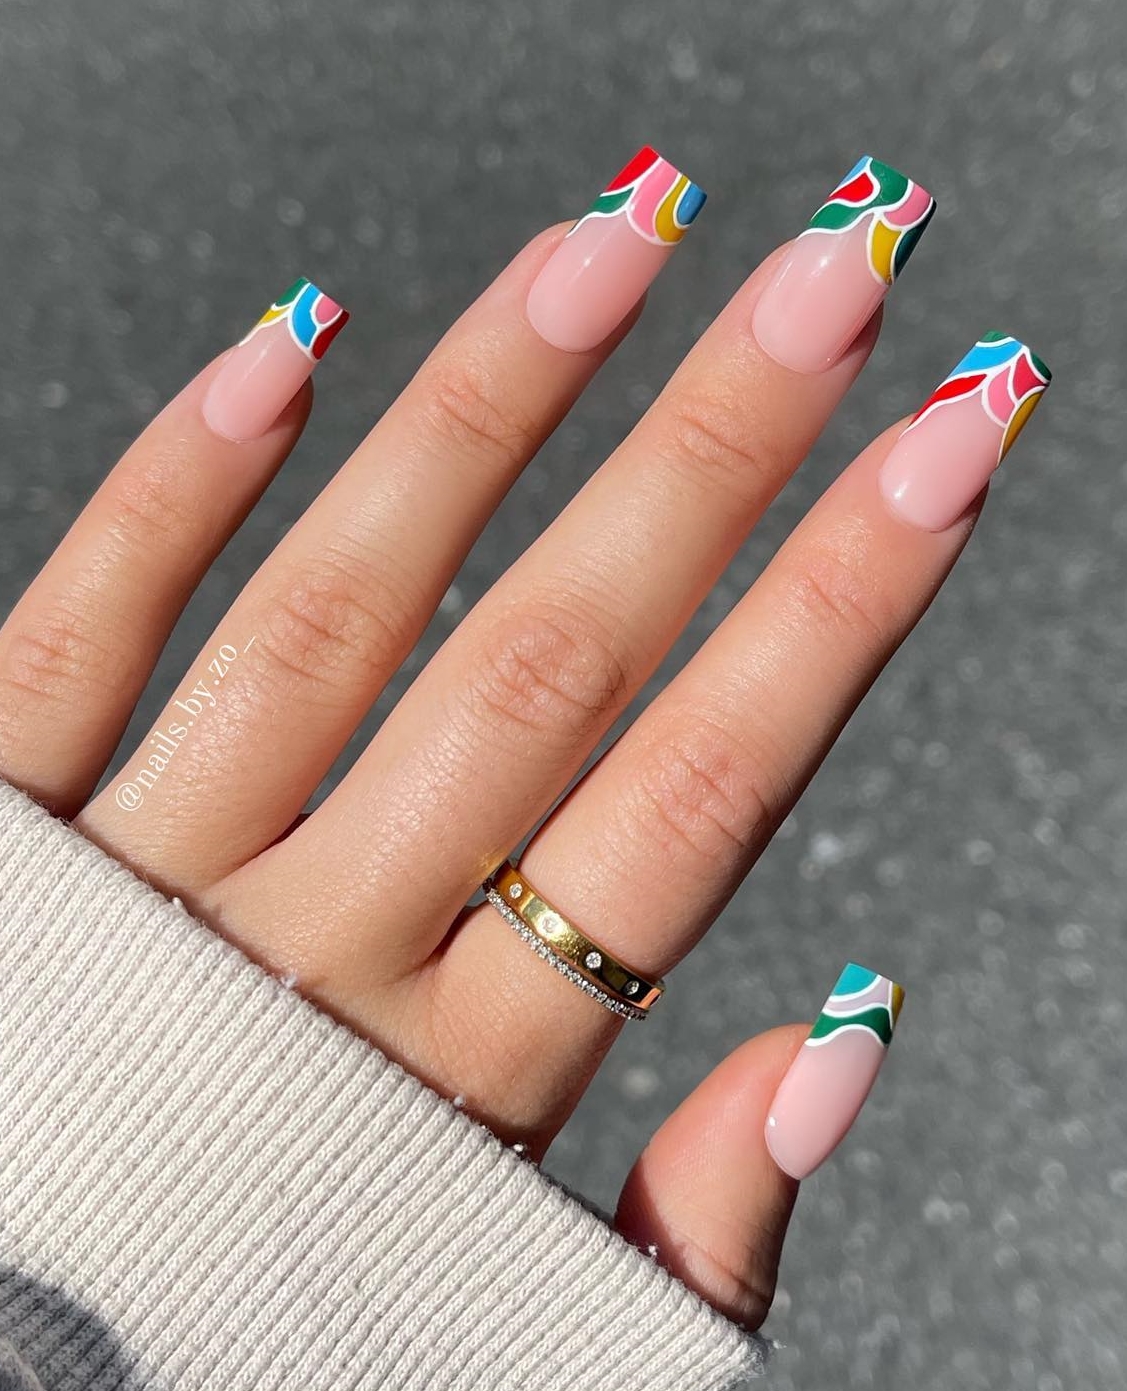 Square Nails with Colorful Tips